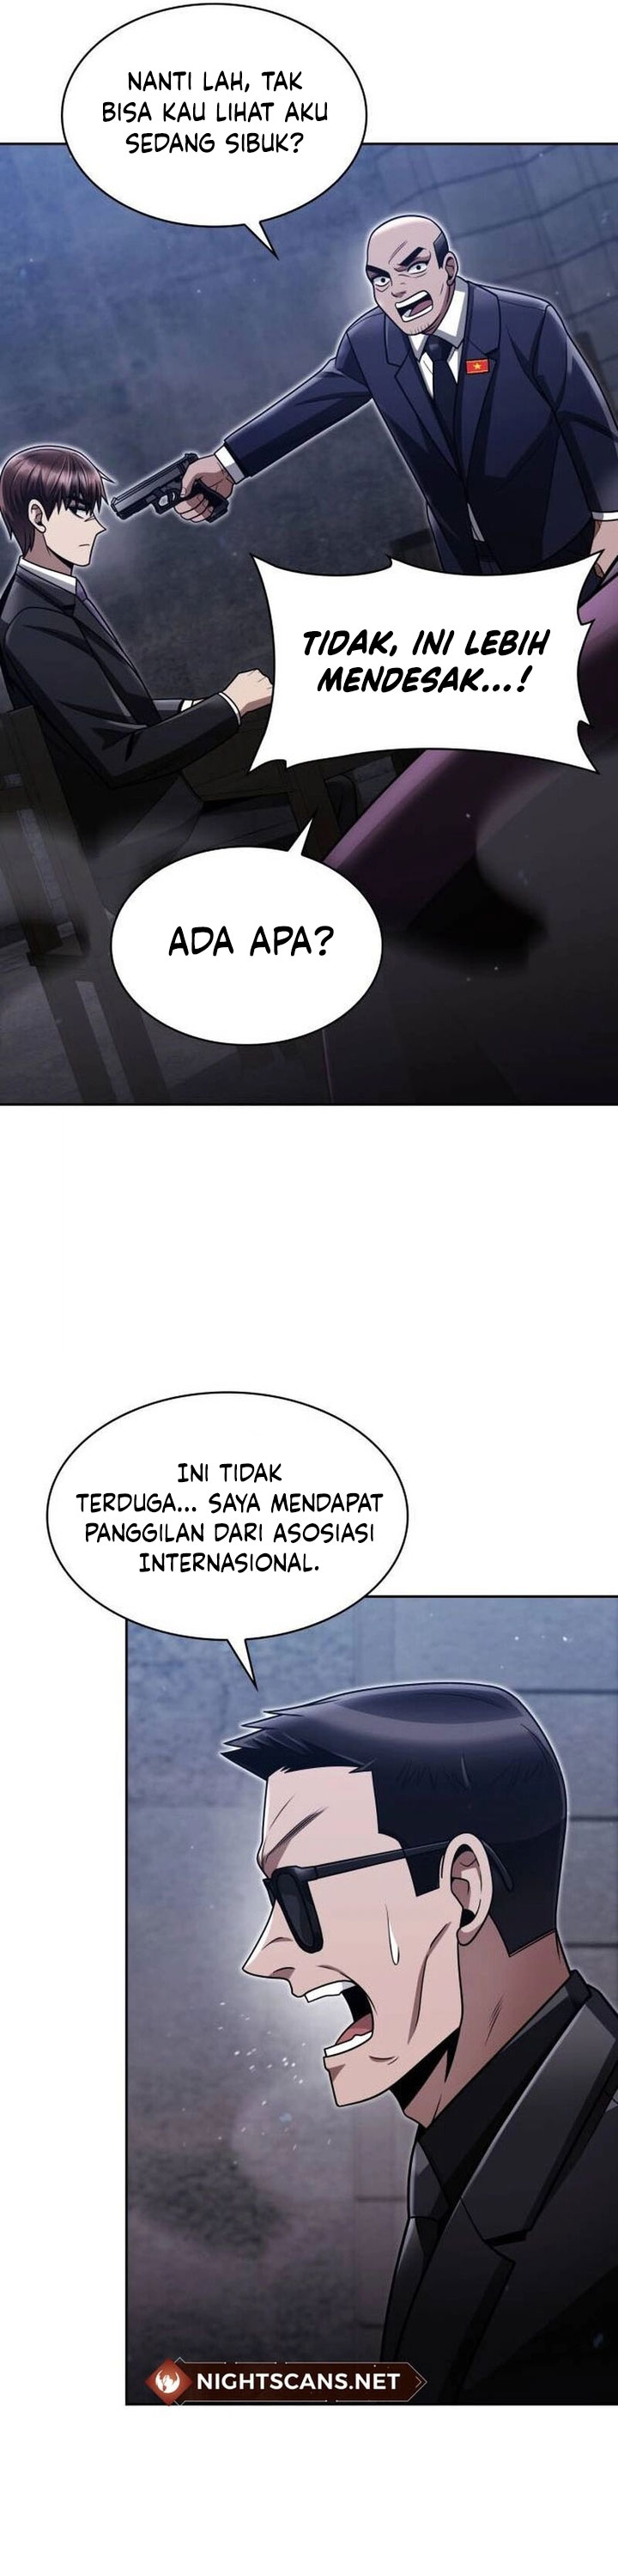 Dilarang COPAS - situs resmi www.mangacanblog.com - Komik clever cleaning life of the returned genius hunter 063 - chapter 63 64 Indonesia clever cleaning life of the returned genius hunter 063 - chapter 63 Terbaru 38|Baca Manga Komik Indonesia|Mangacan